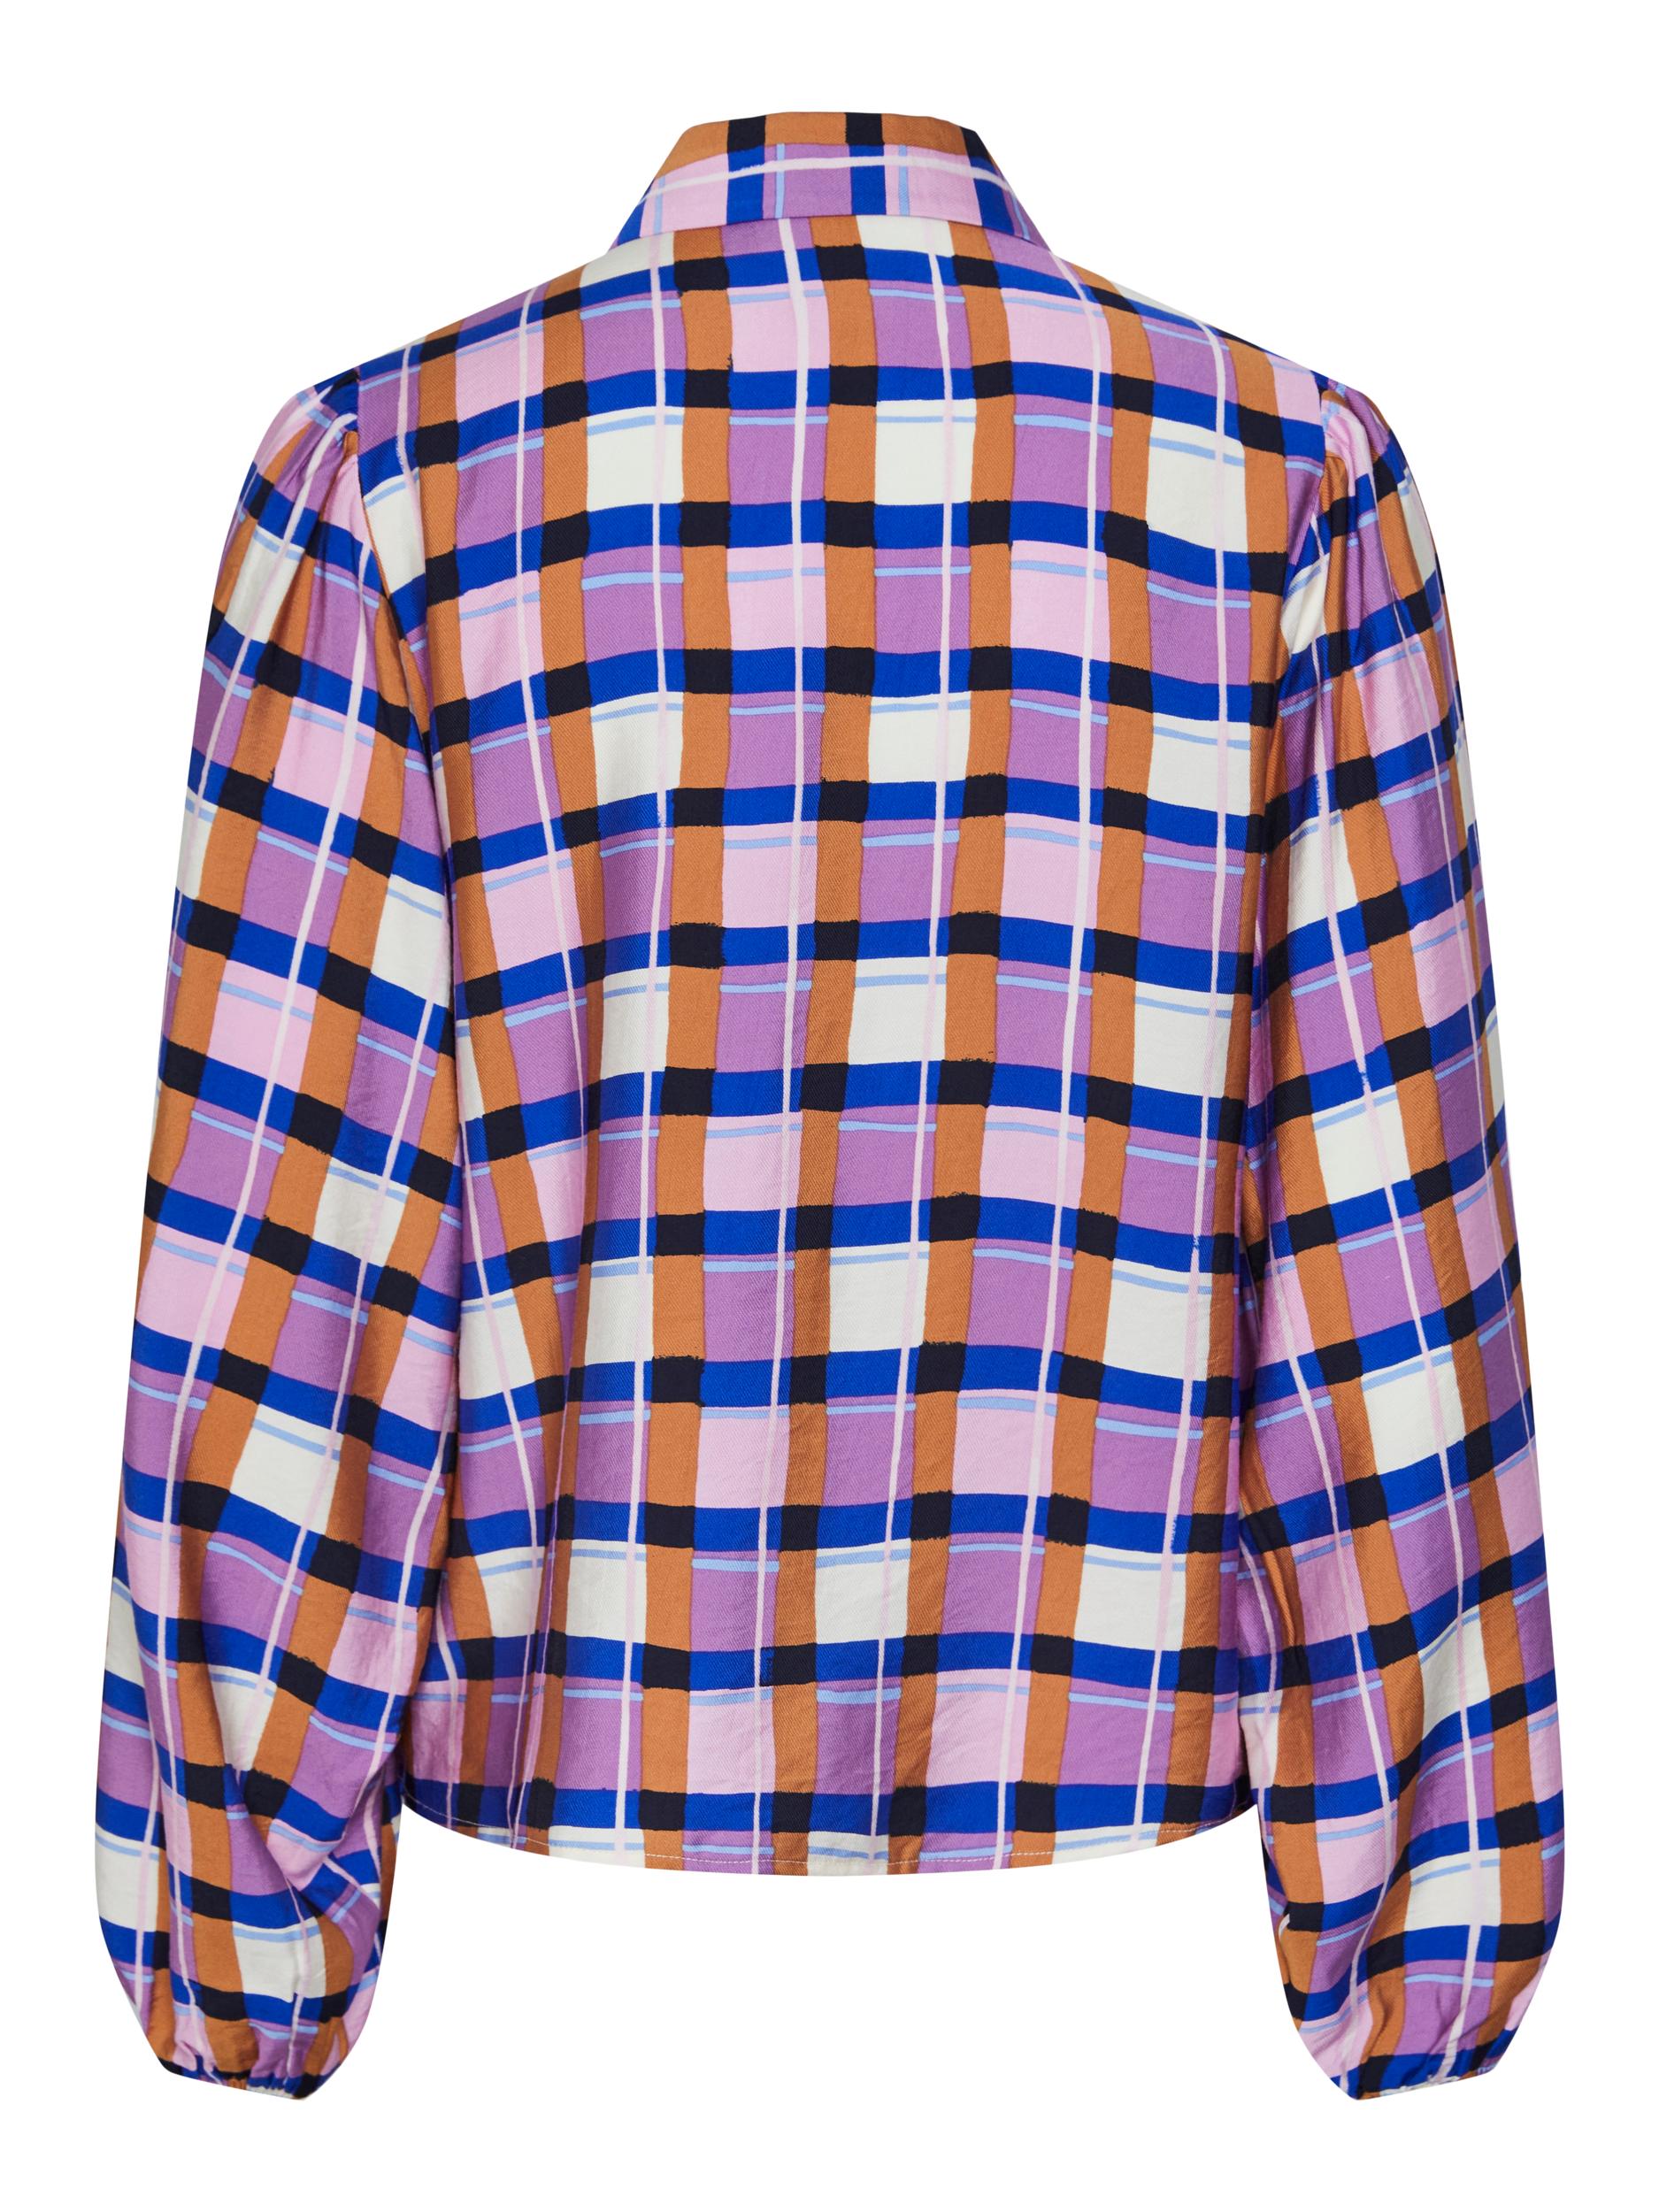 Y.A.S | SQUARE LS SHIRT - MULBERRY